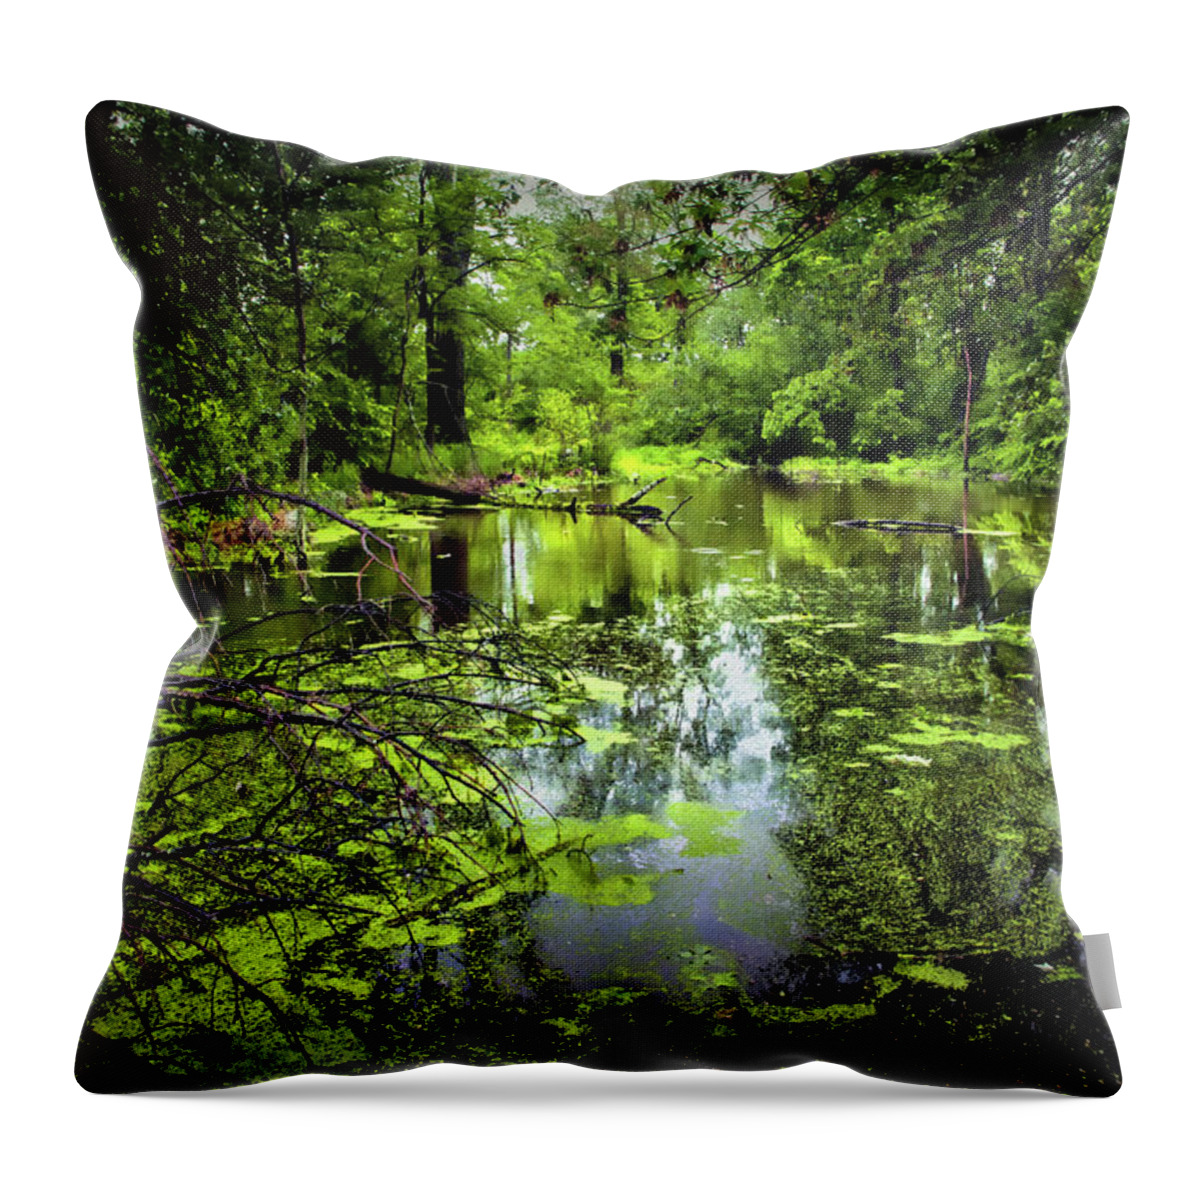 Green Pond Throw Pillow featuring the photograph Green Blossoms On Pond by Jerry Cowart